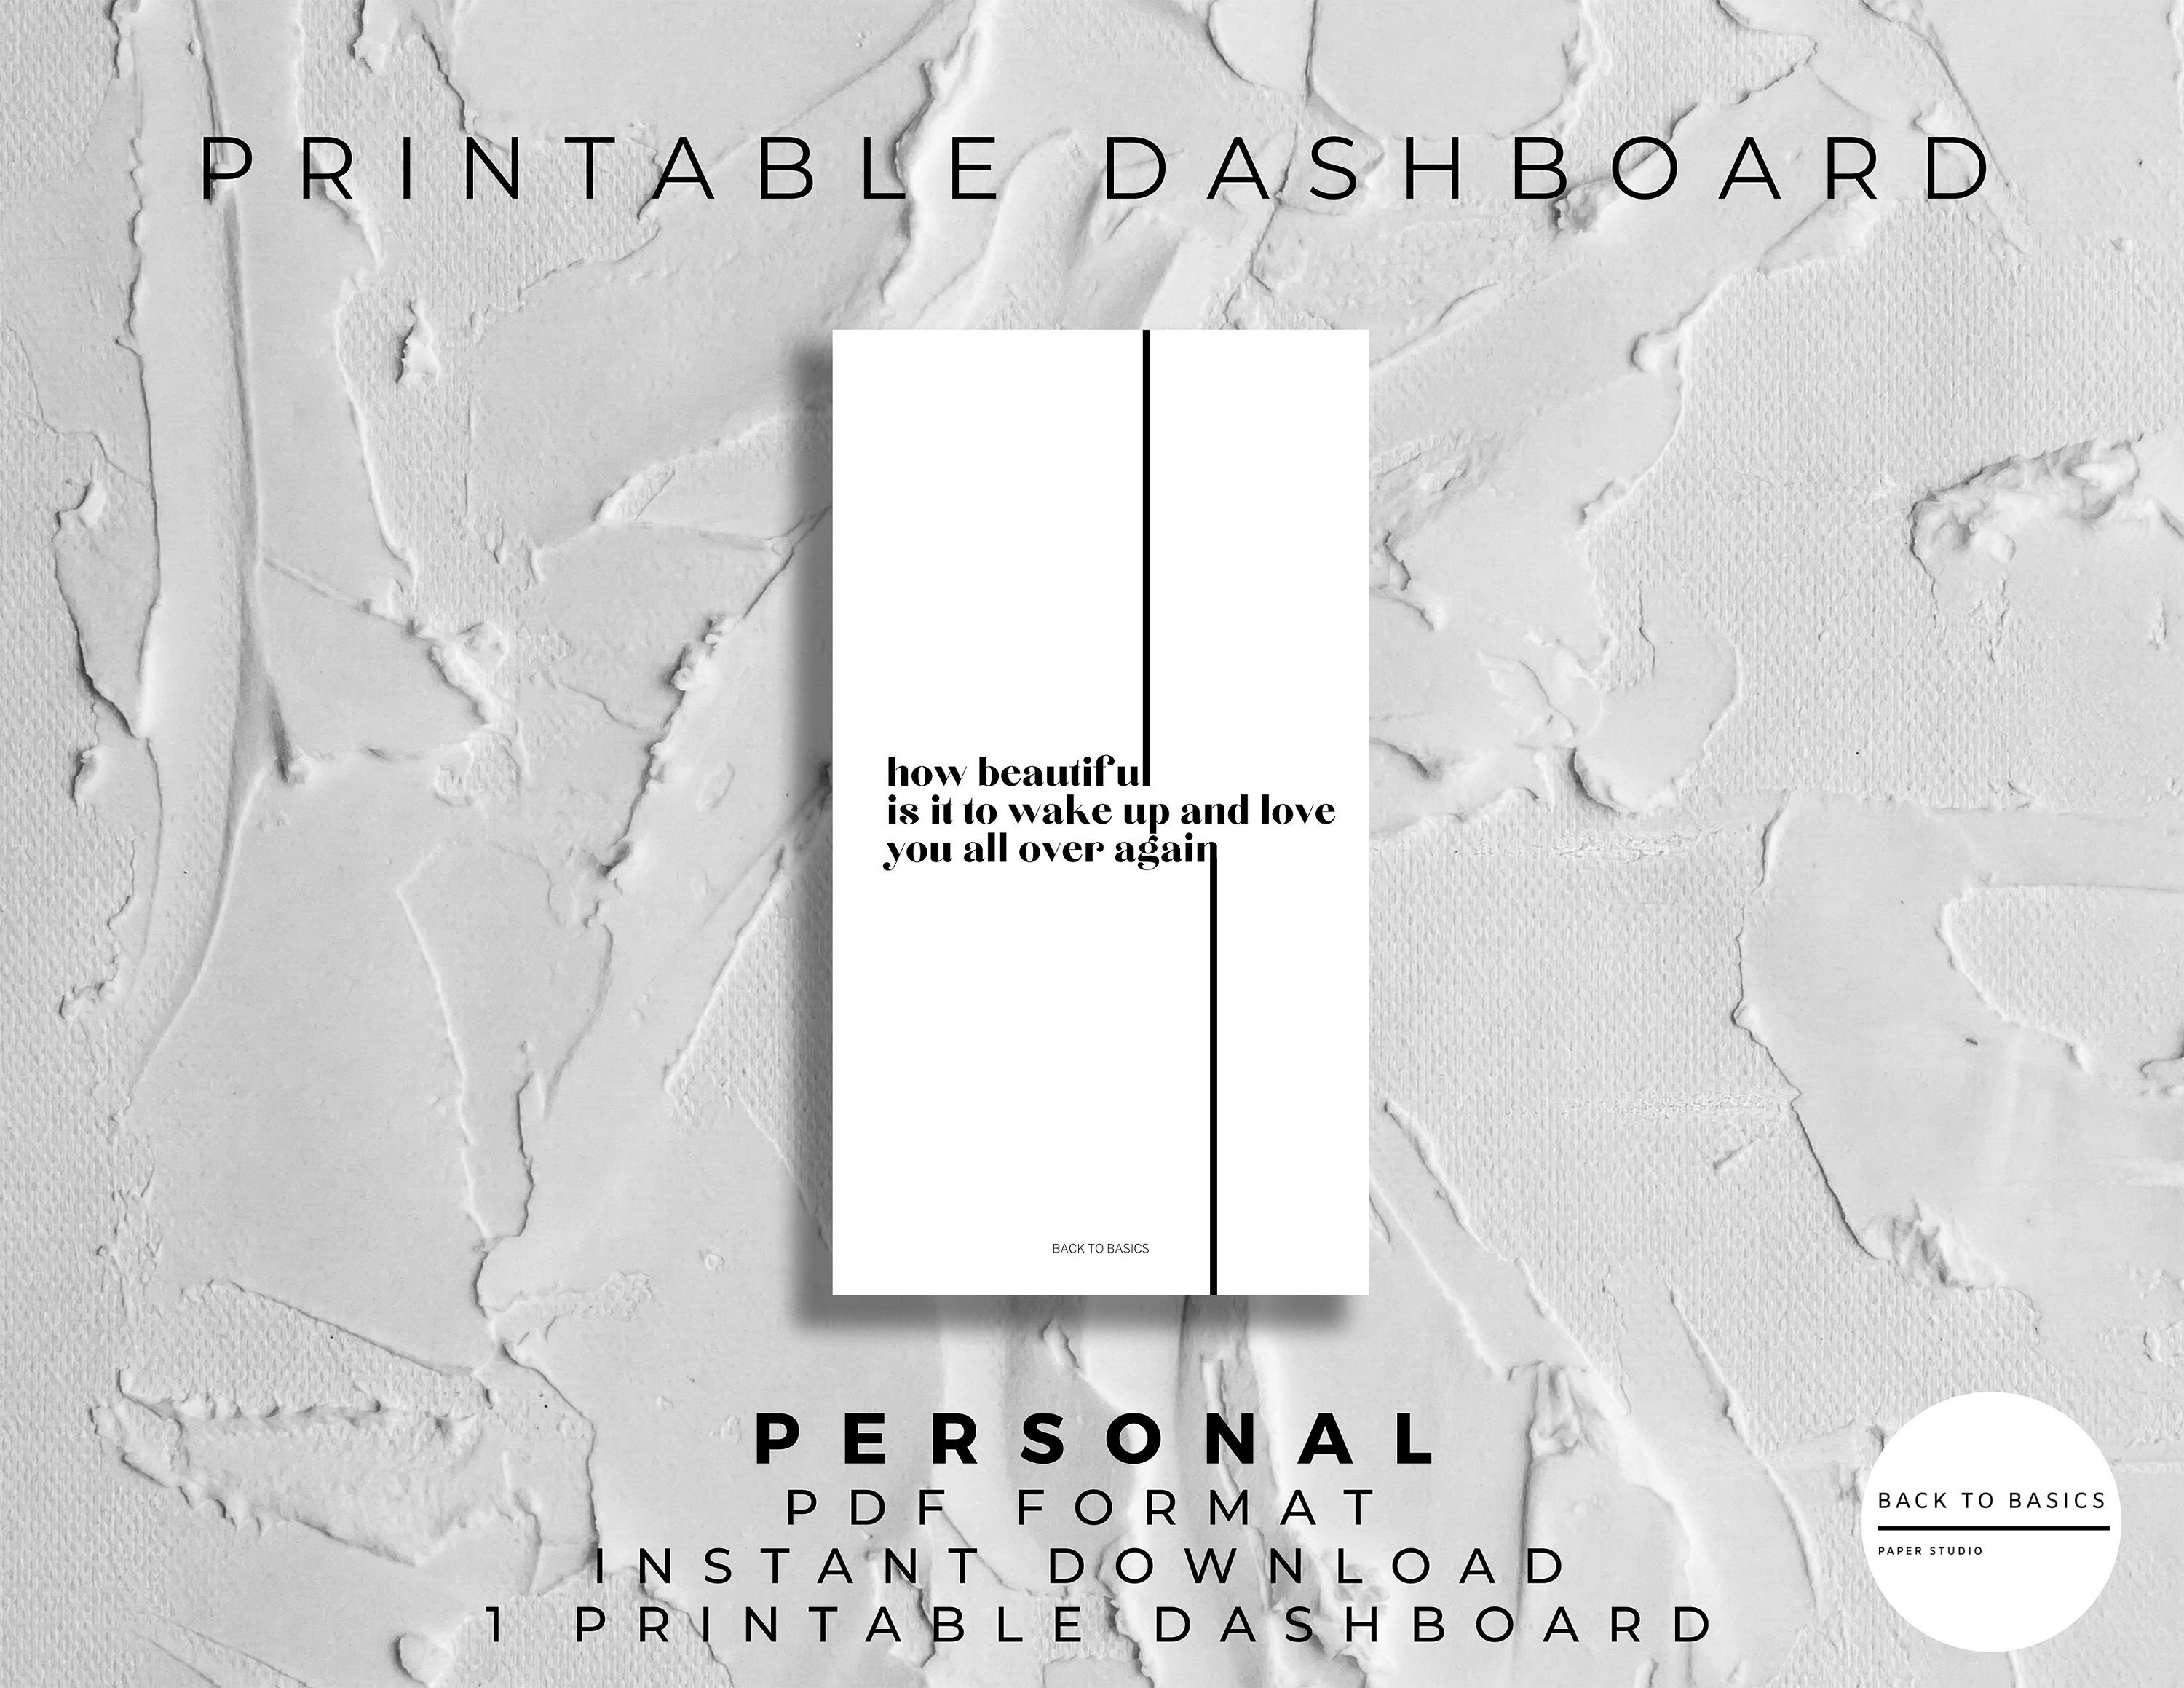 PERSONAL RINGS 'How To' Digital Printable Dashboard